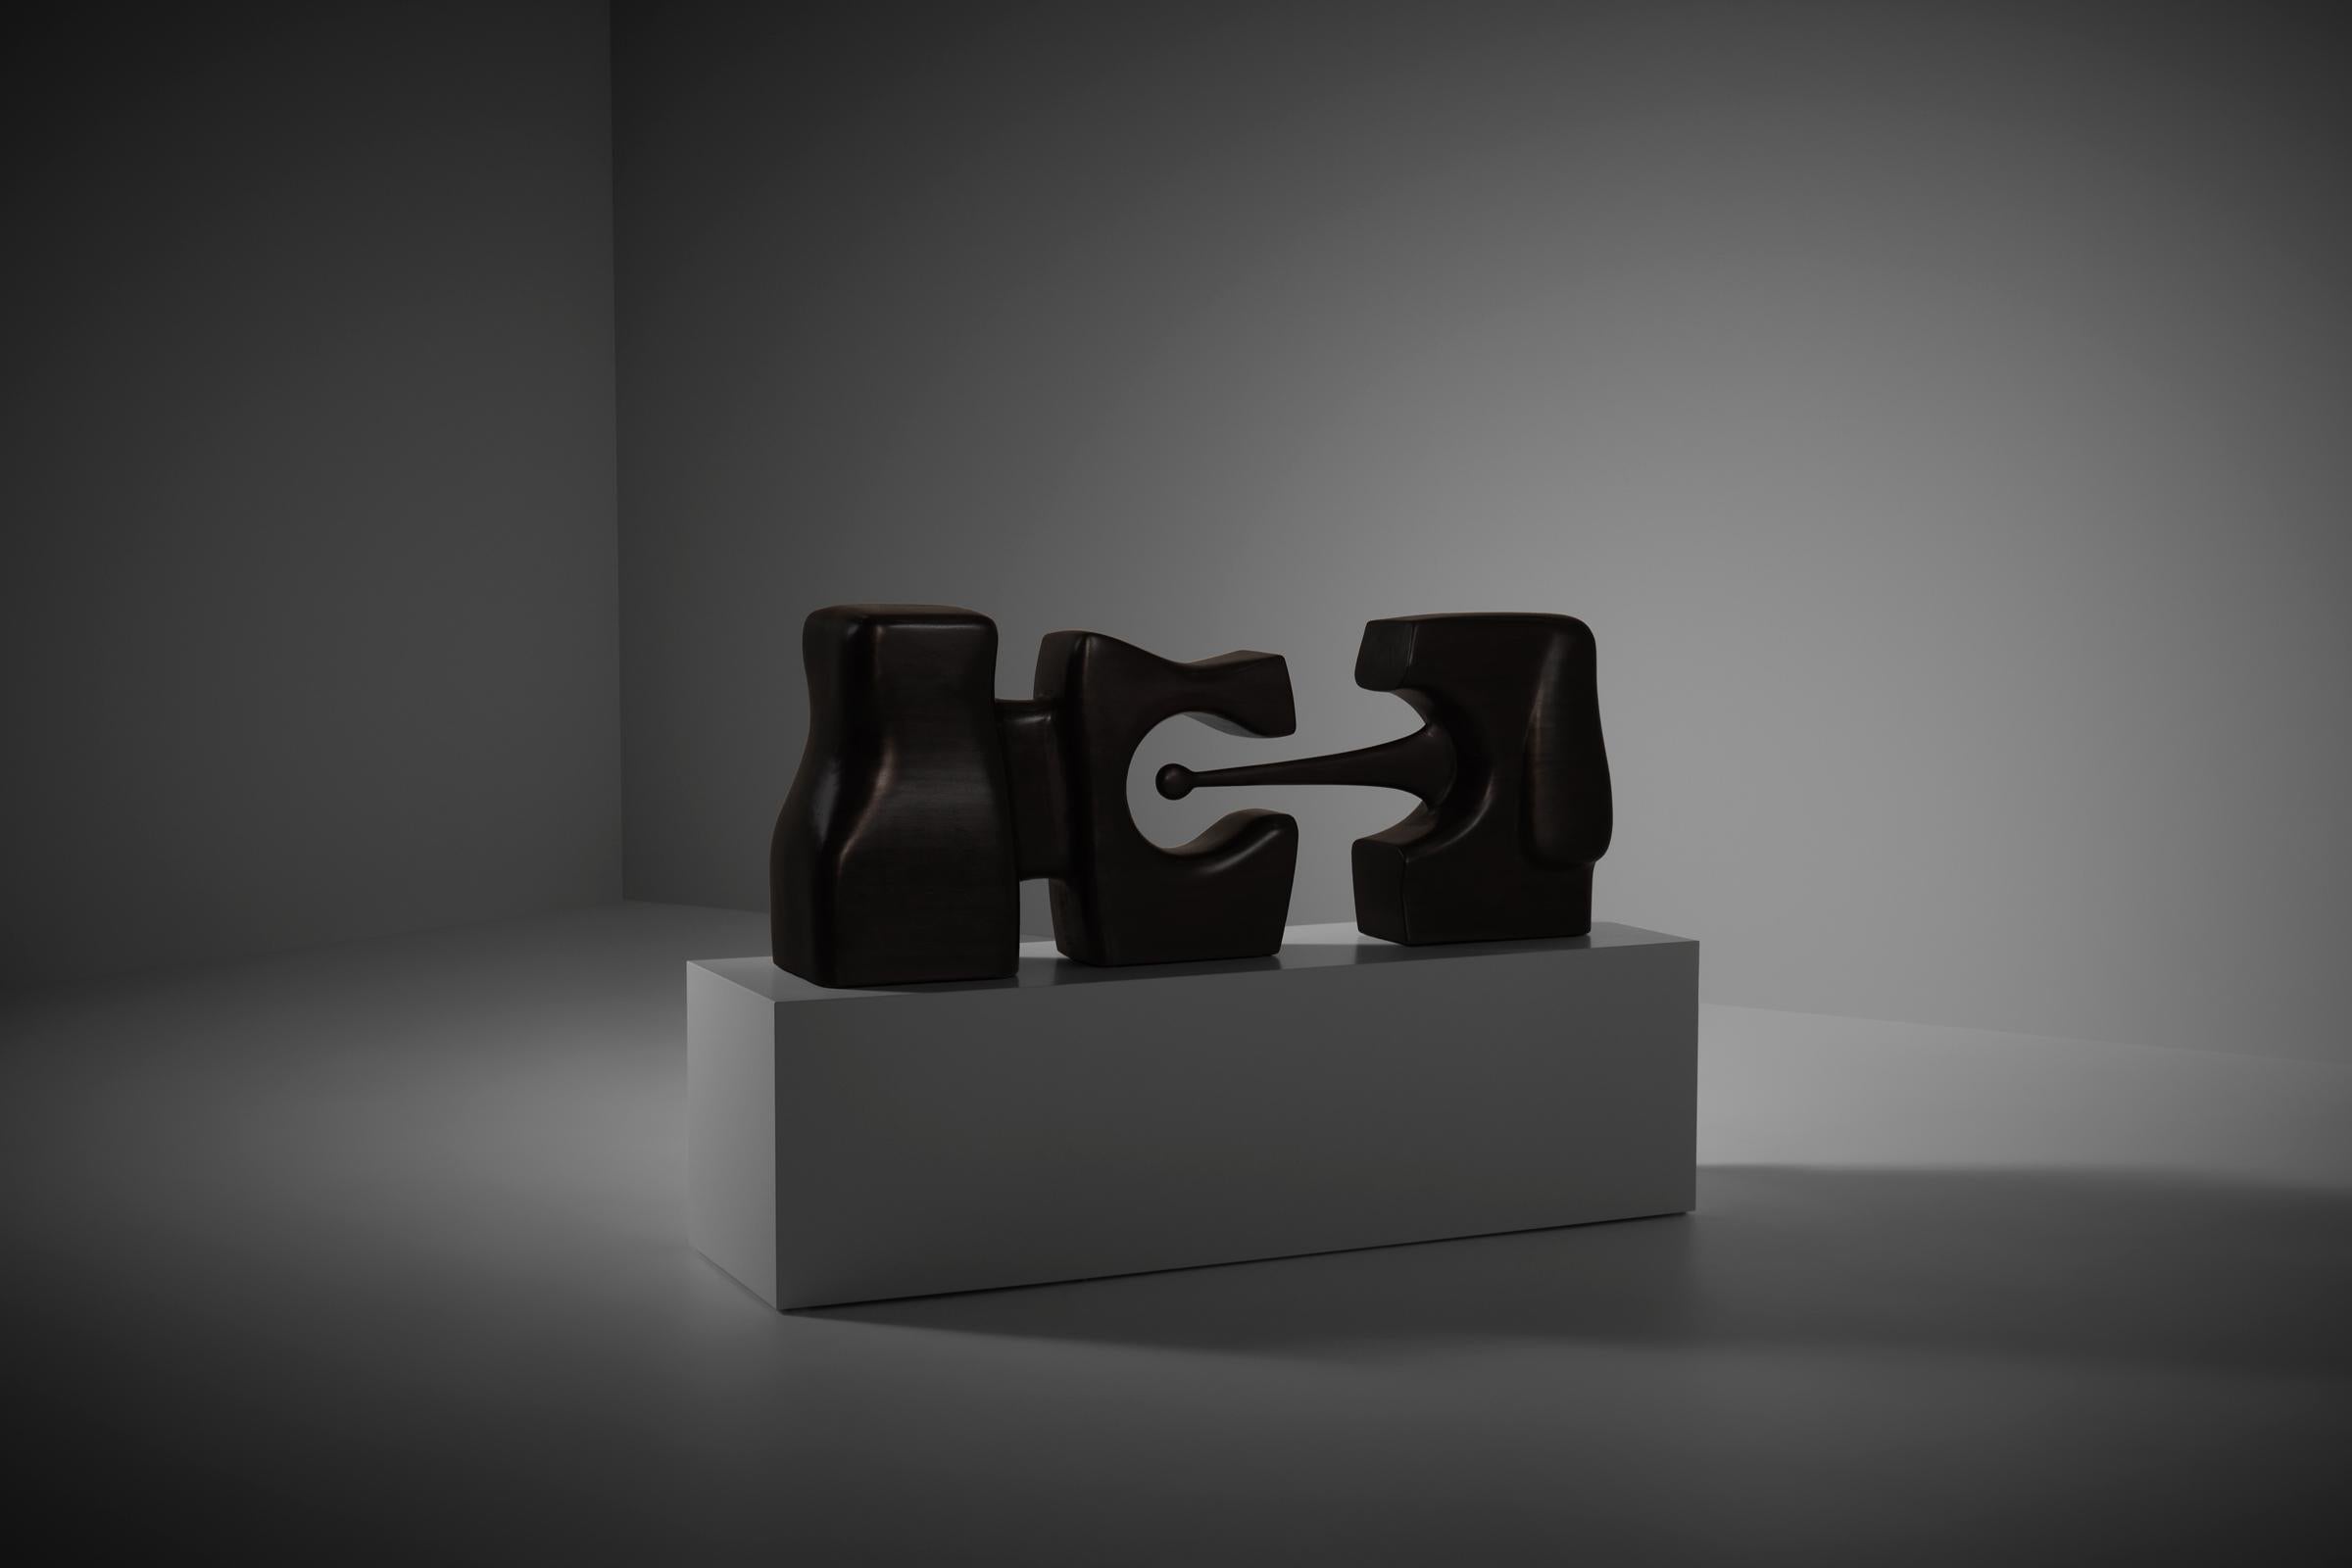 Large abstract organic wooden sculpture by B. van Beek (1946), The Netherlands 1970s. Made from light tropical wood with a beautiful linear grain and a soft and smooth surface, finished in a very dark chocolate brown wax staining. Elegent yet strong